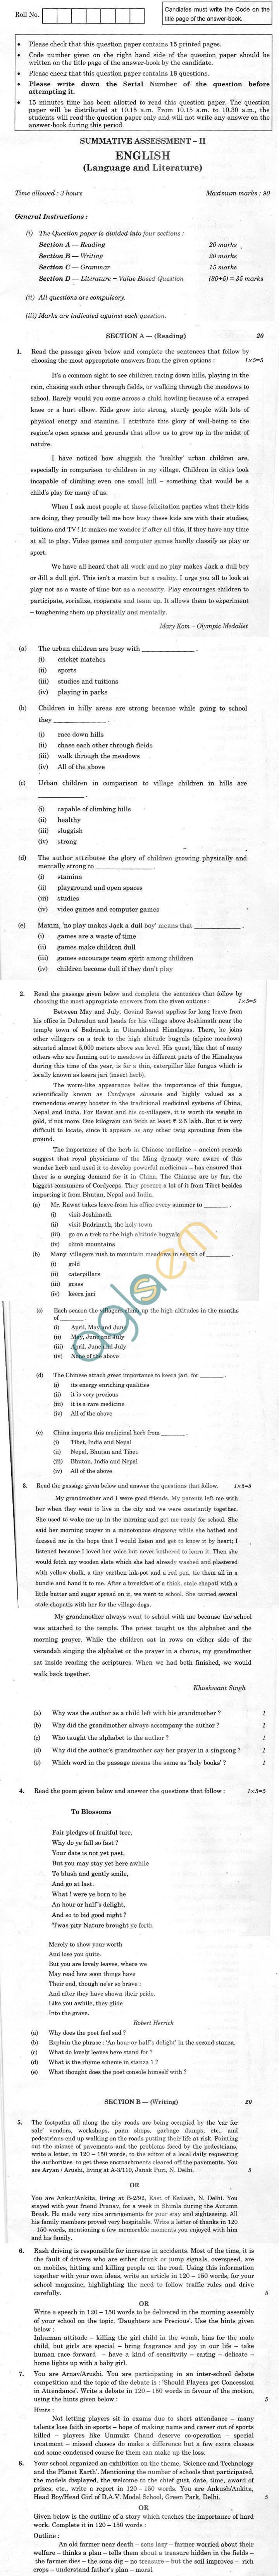 CBSE Compartment Exam 2013 Class X Question Paper - English Language and Literature